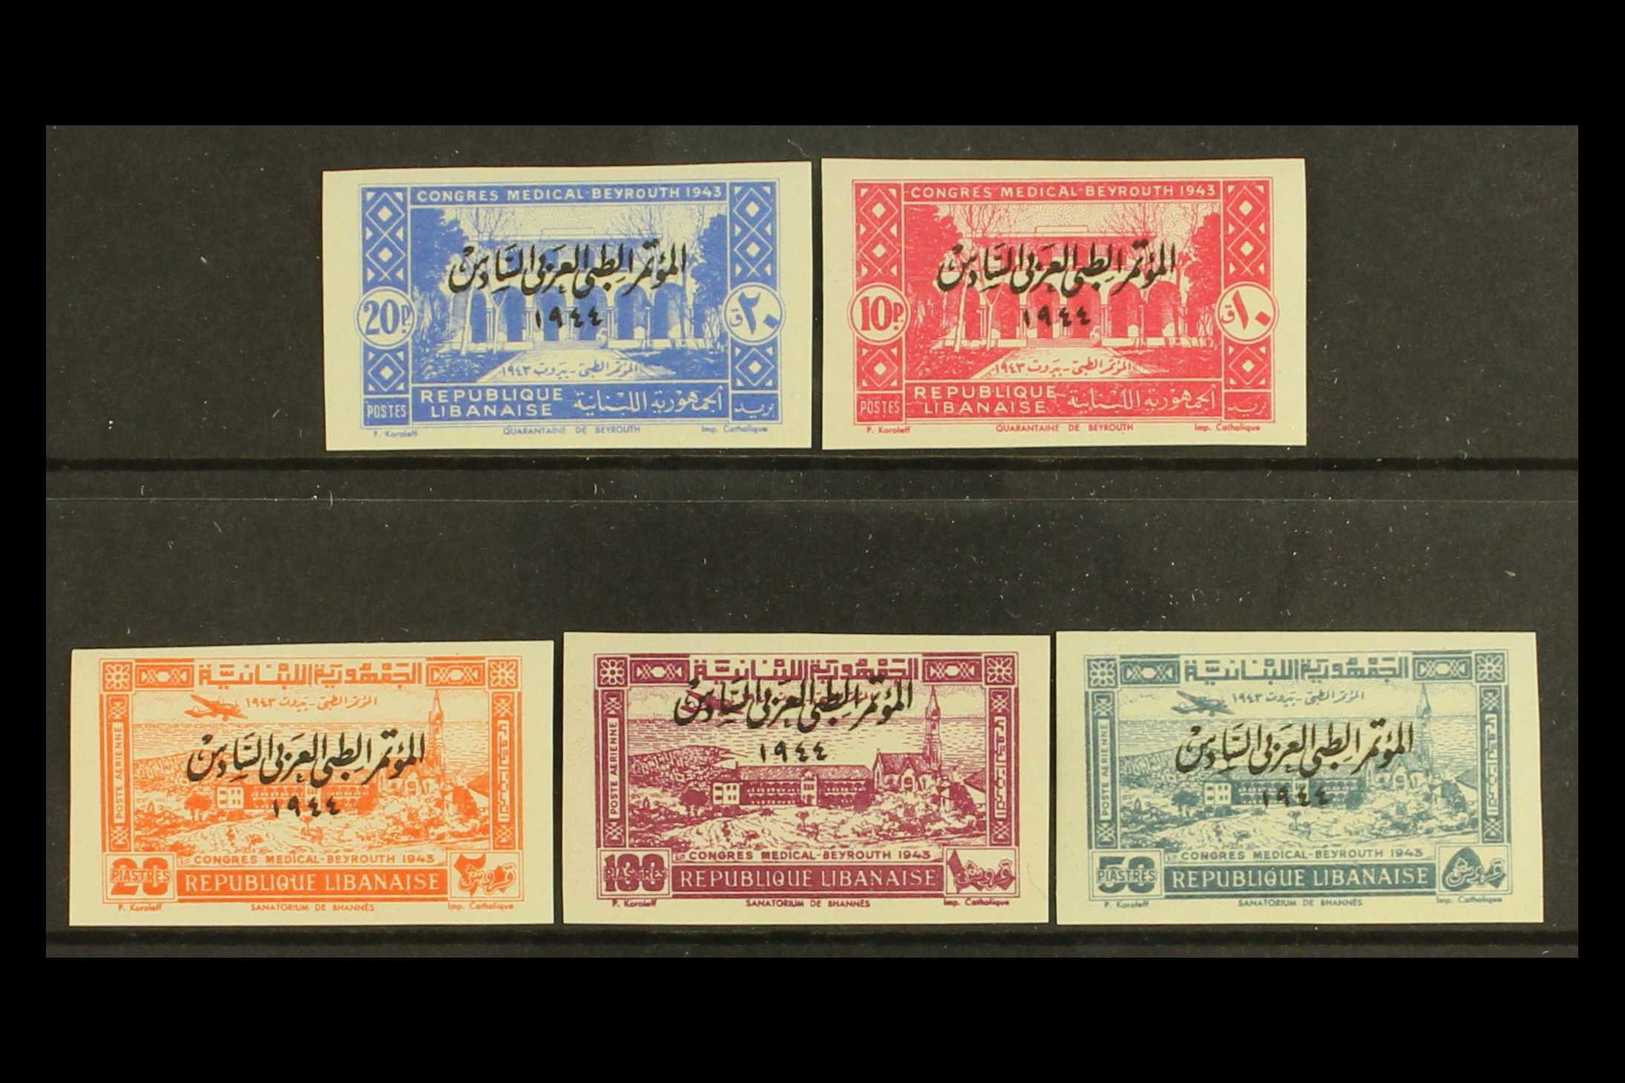 1943  Beirut Medical Congress Overprinted Postage And Airmail IMPERFORATE Complete Set, Maury 187/188 & 88/90, Never Hin - Lebanon